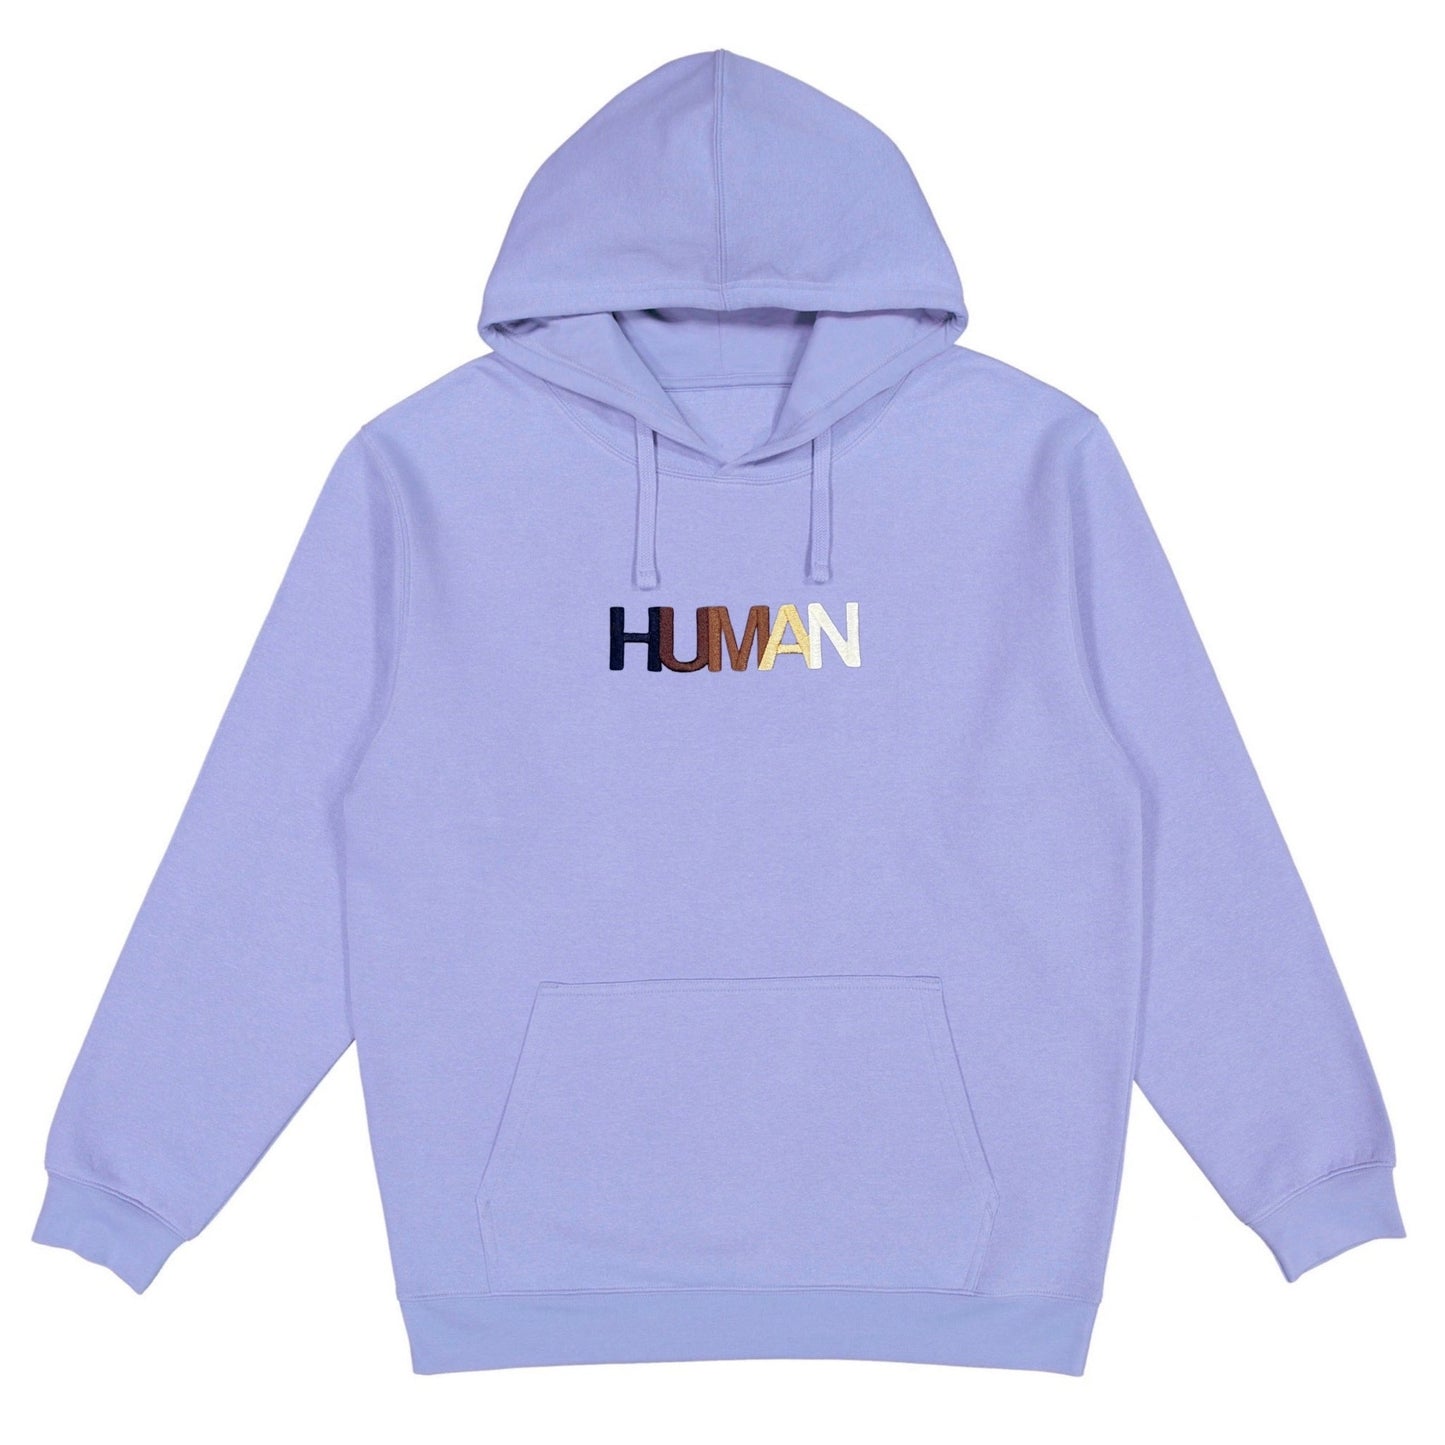 Human Embroidered Hoodie Wear The Peace Hoodies Violet S